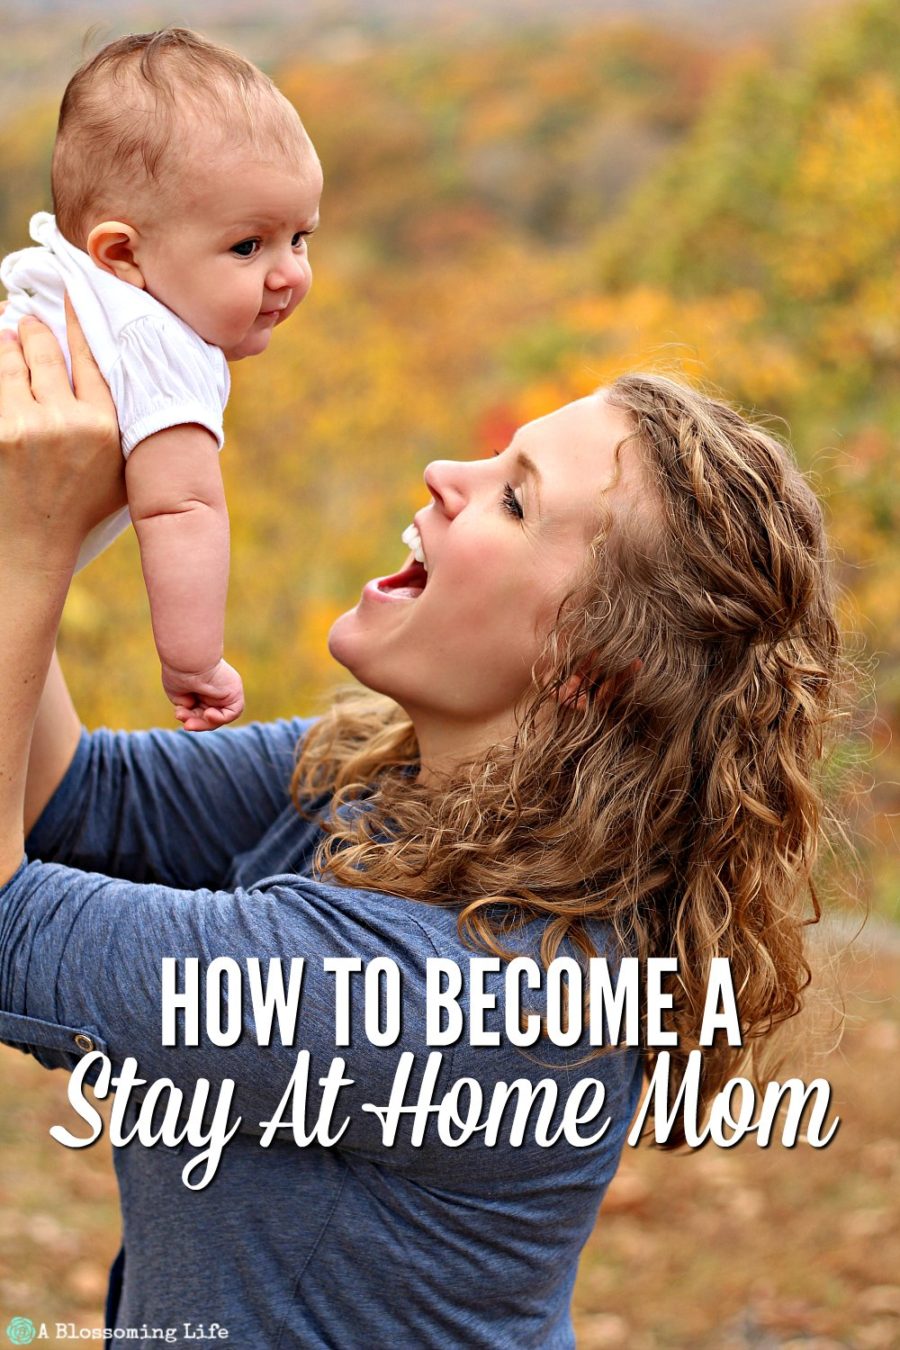 How to Become a Stay At Home Mom